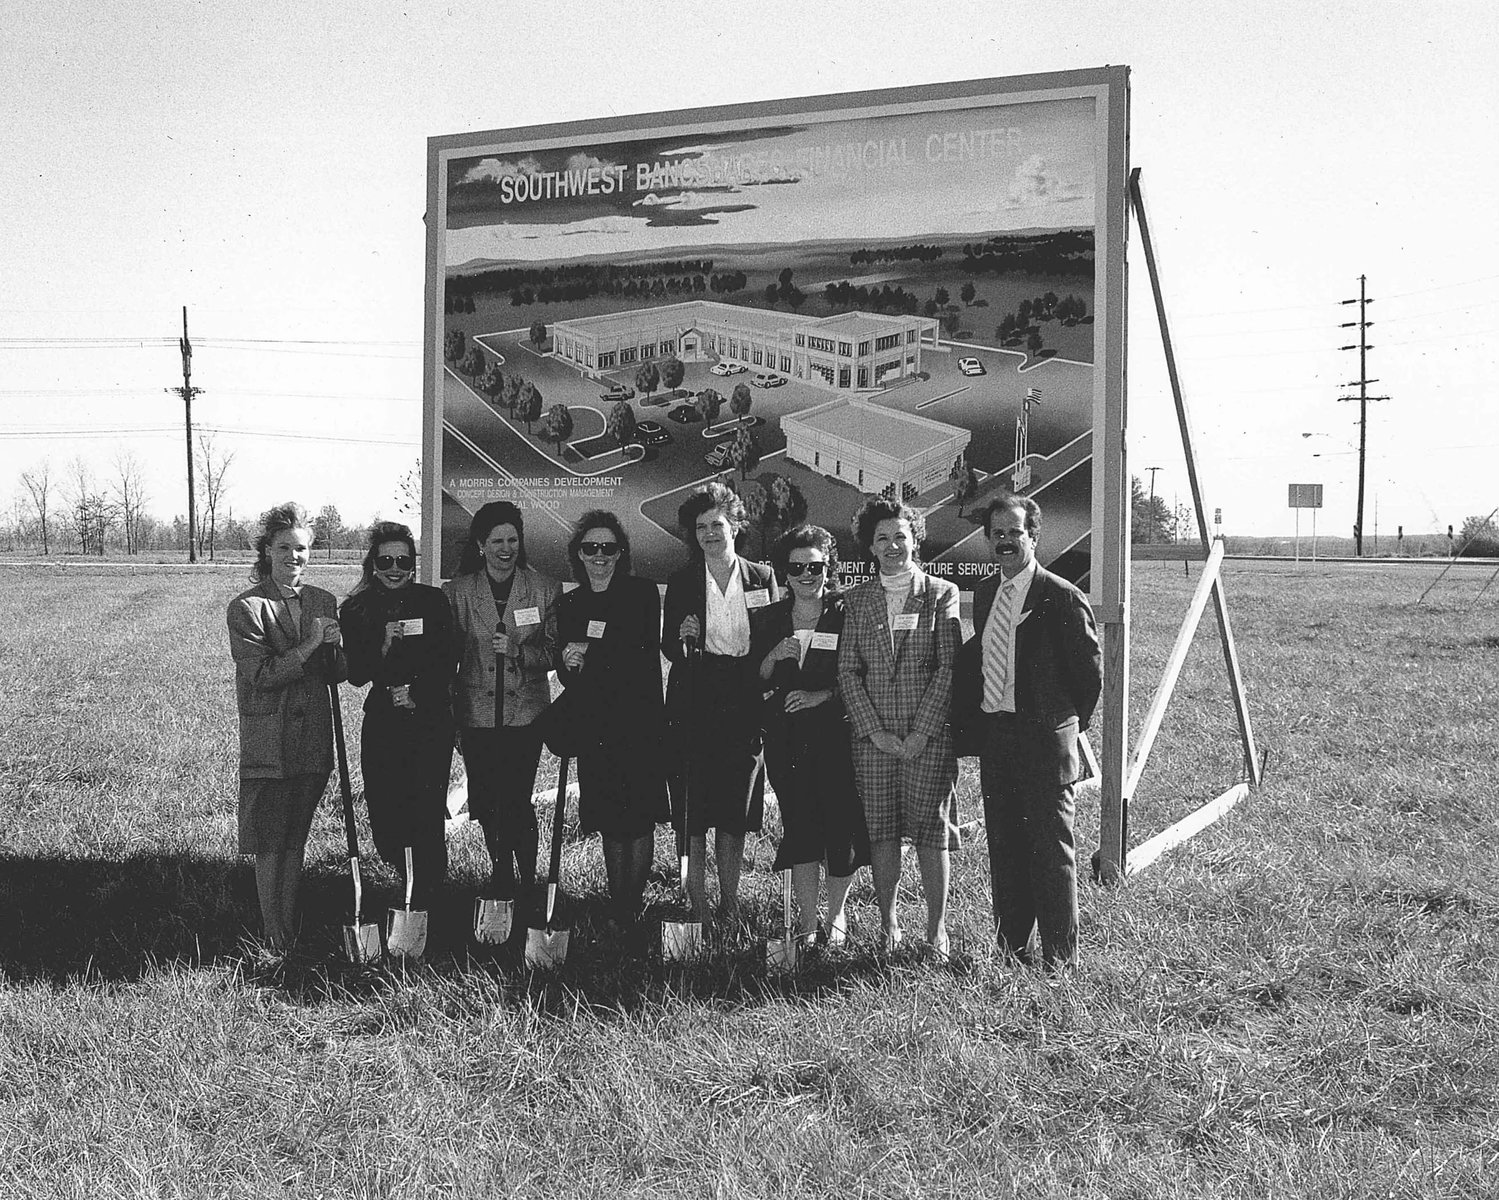 At right, Tracy Kimberlin breaks ground on a tourist information center on U.S. Highway 65 near the start of his 35-year career.